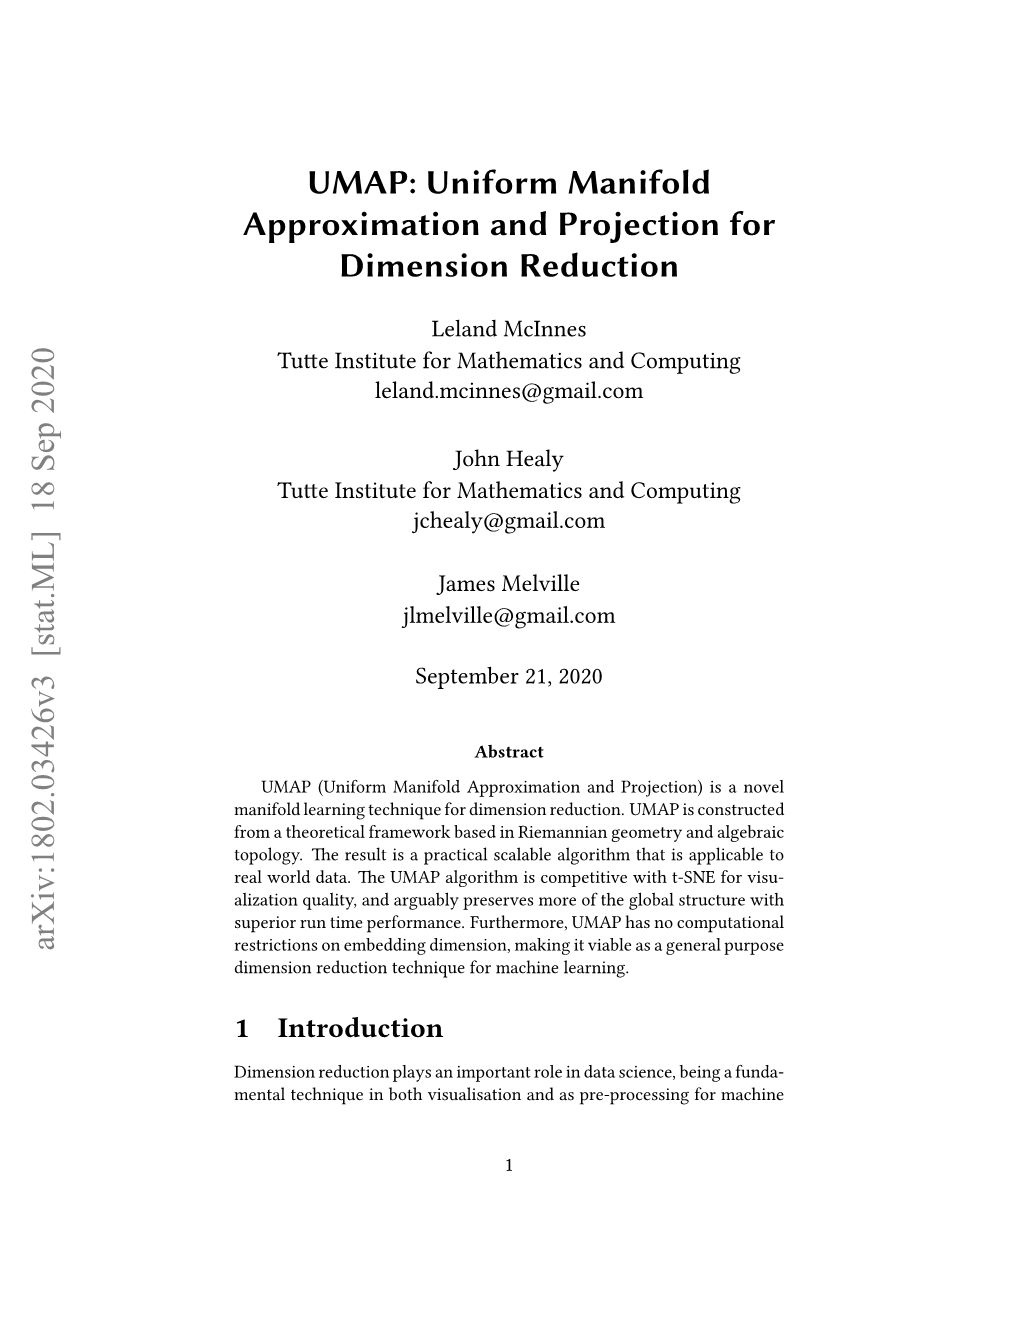 Uniform Manifold Approximation and Projection for Dimension Reduction